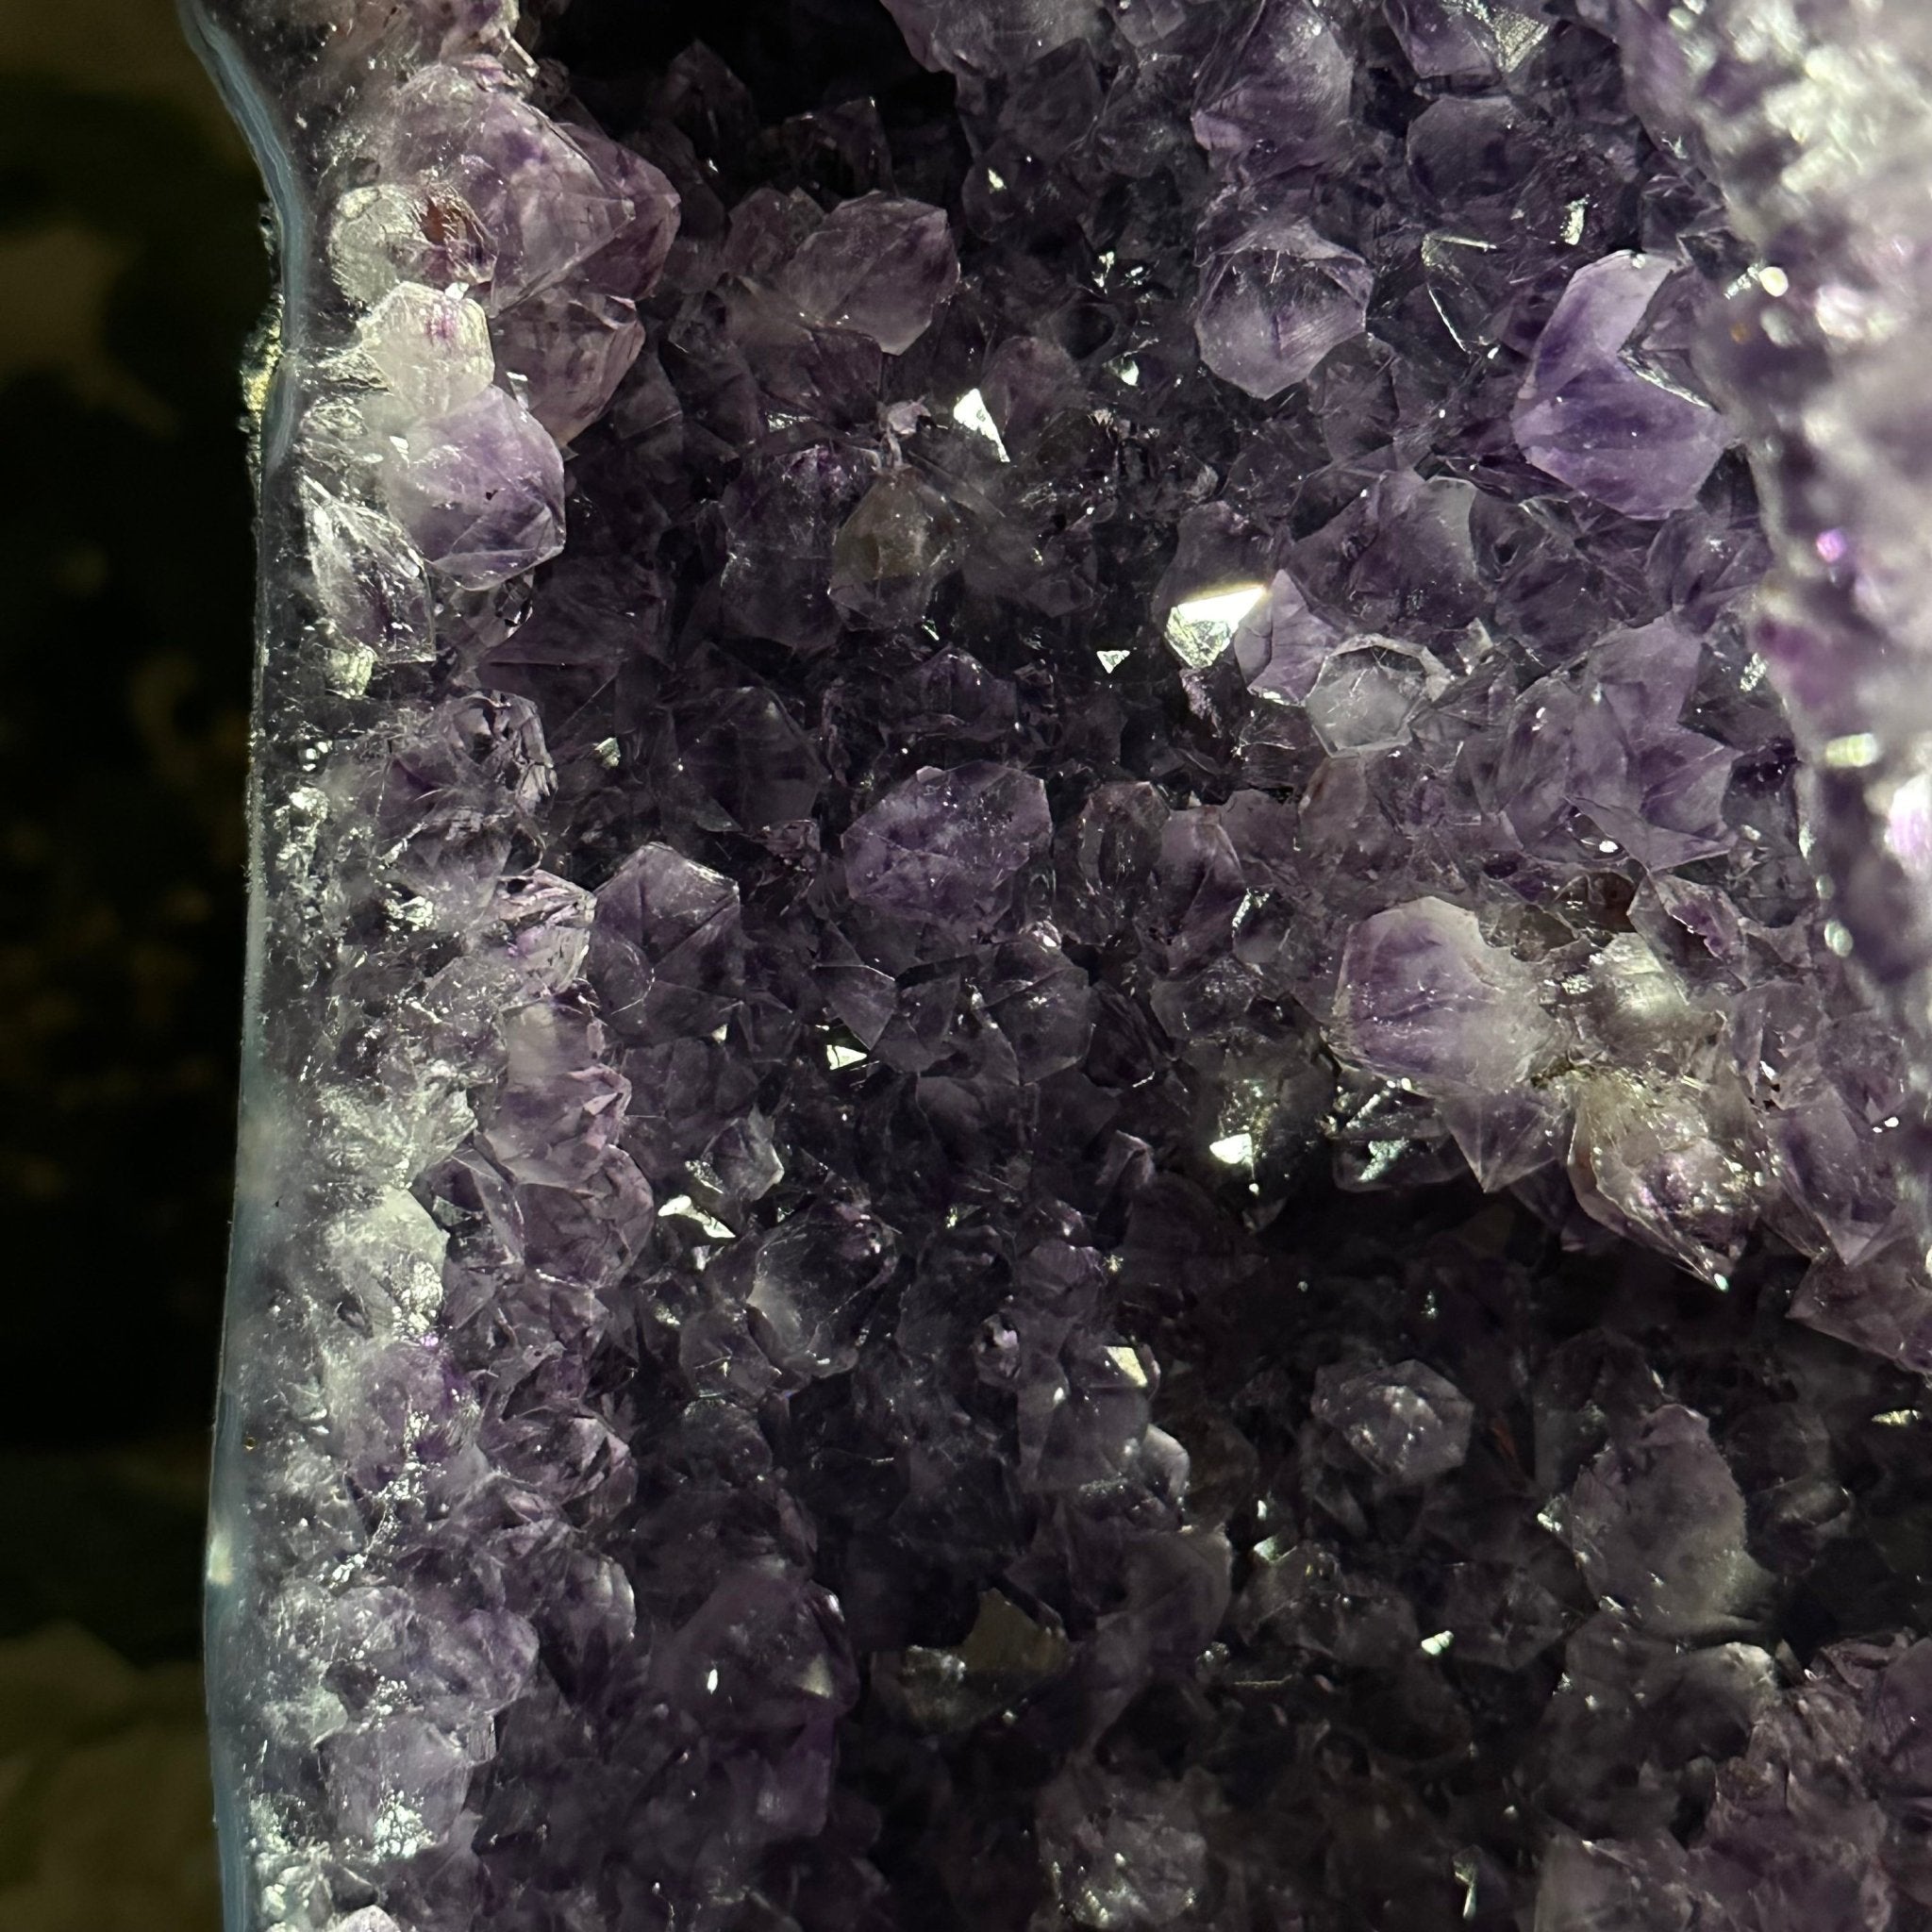 Quality Brazilian Amethyst Cathedral, 20.9 lbs & 18.7" Tall, #5601 - 1390 - Brazil GemsBrazil GemsQuality Brazilian Amethyst Cathedral, 20.9 lbs & 18.7" Tall, #5601 - 1390Cathedrals5601 - 1390